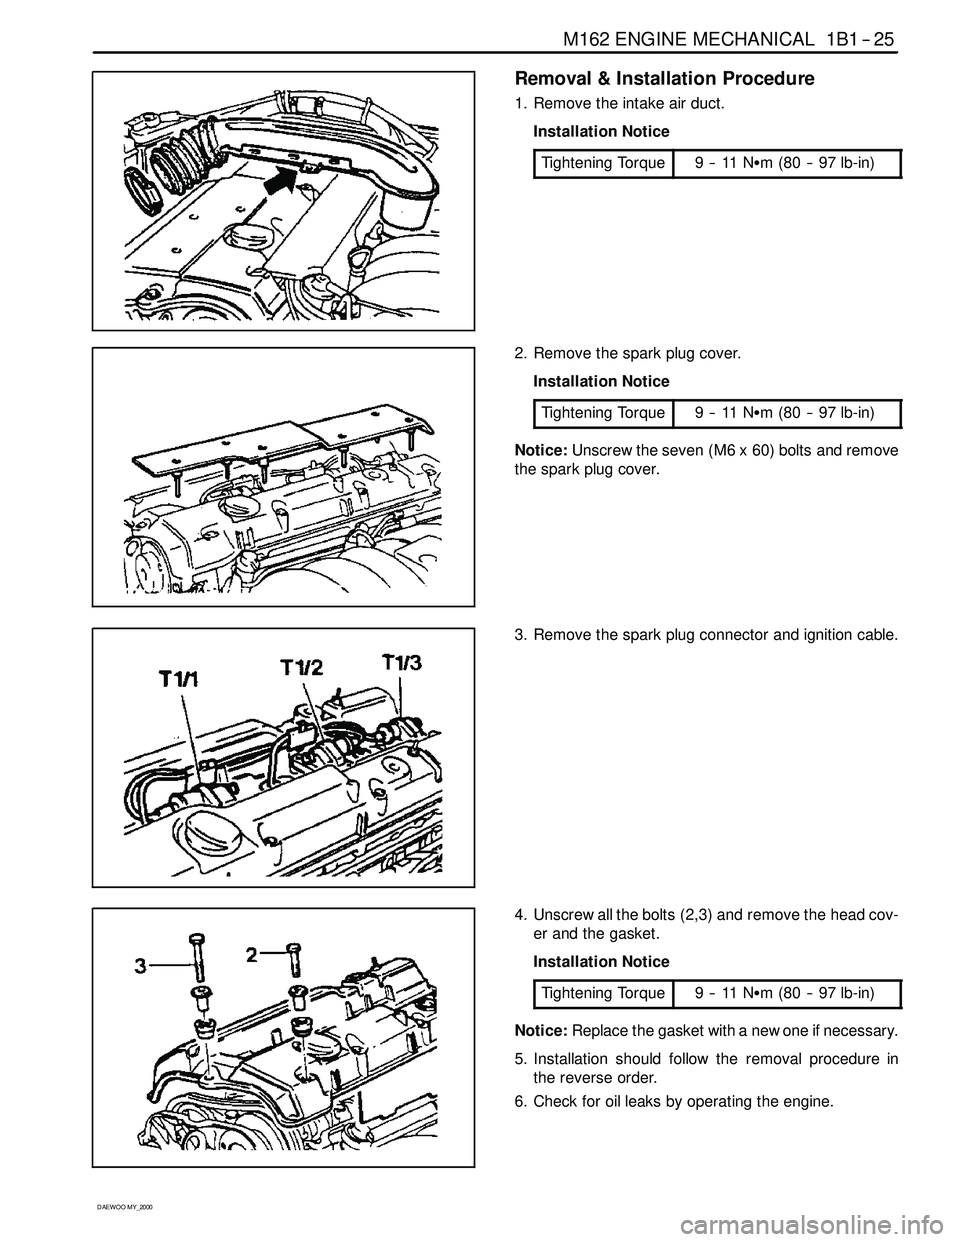 SSANGYONG KORANDO 1997  Service Repair Manual M162 ENGINE MECHANICAL 1B1 -- 25
D AEW OO M Y_2000
Removal & Installation Procedure
1. Remove the intake air duct.
Installation Notice
Tightening Torque
9--11NSm (80 -- 97 lb-in)
2. Remove the spark p